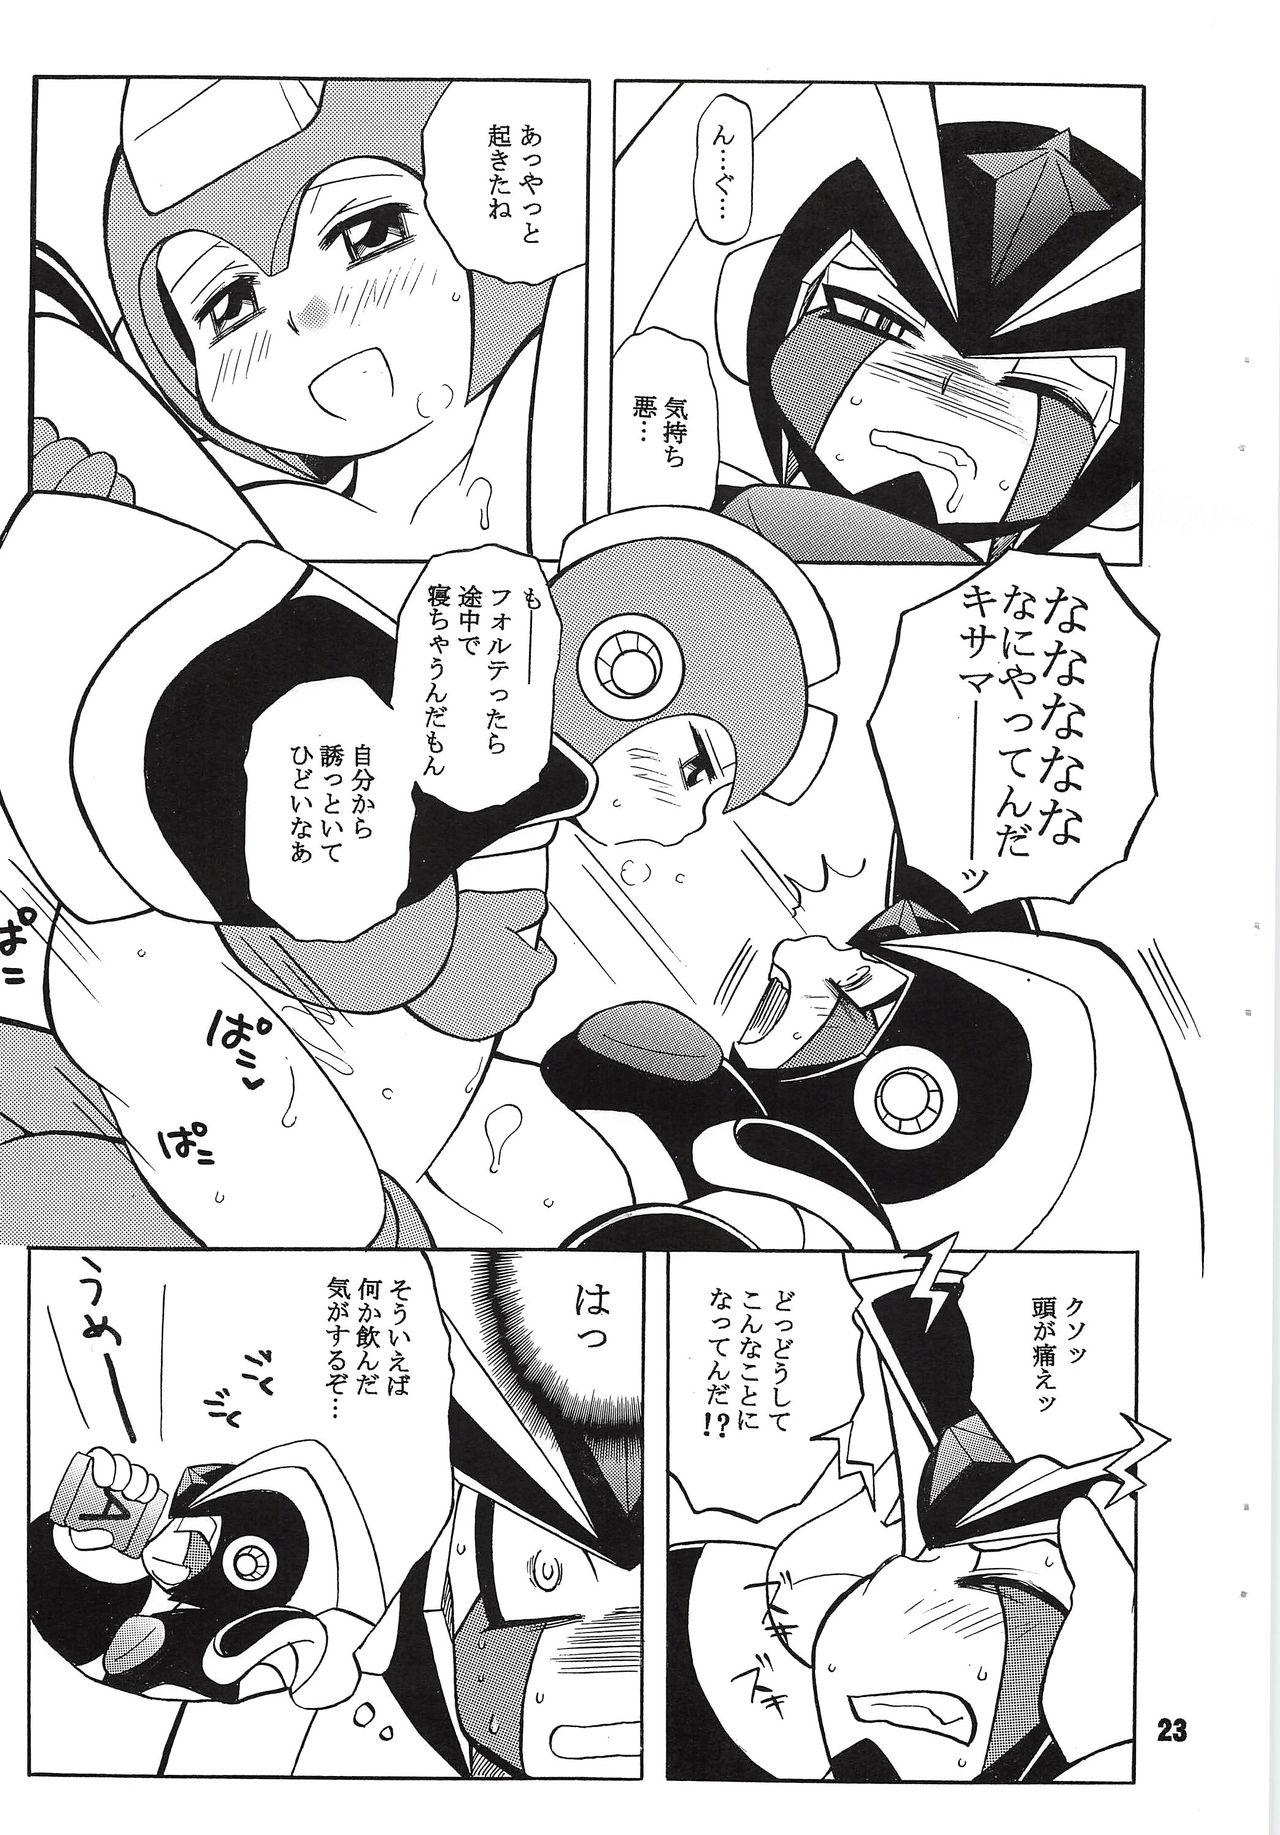 Red BASS DRUNKER - Megaman Hoe - Page 23